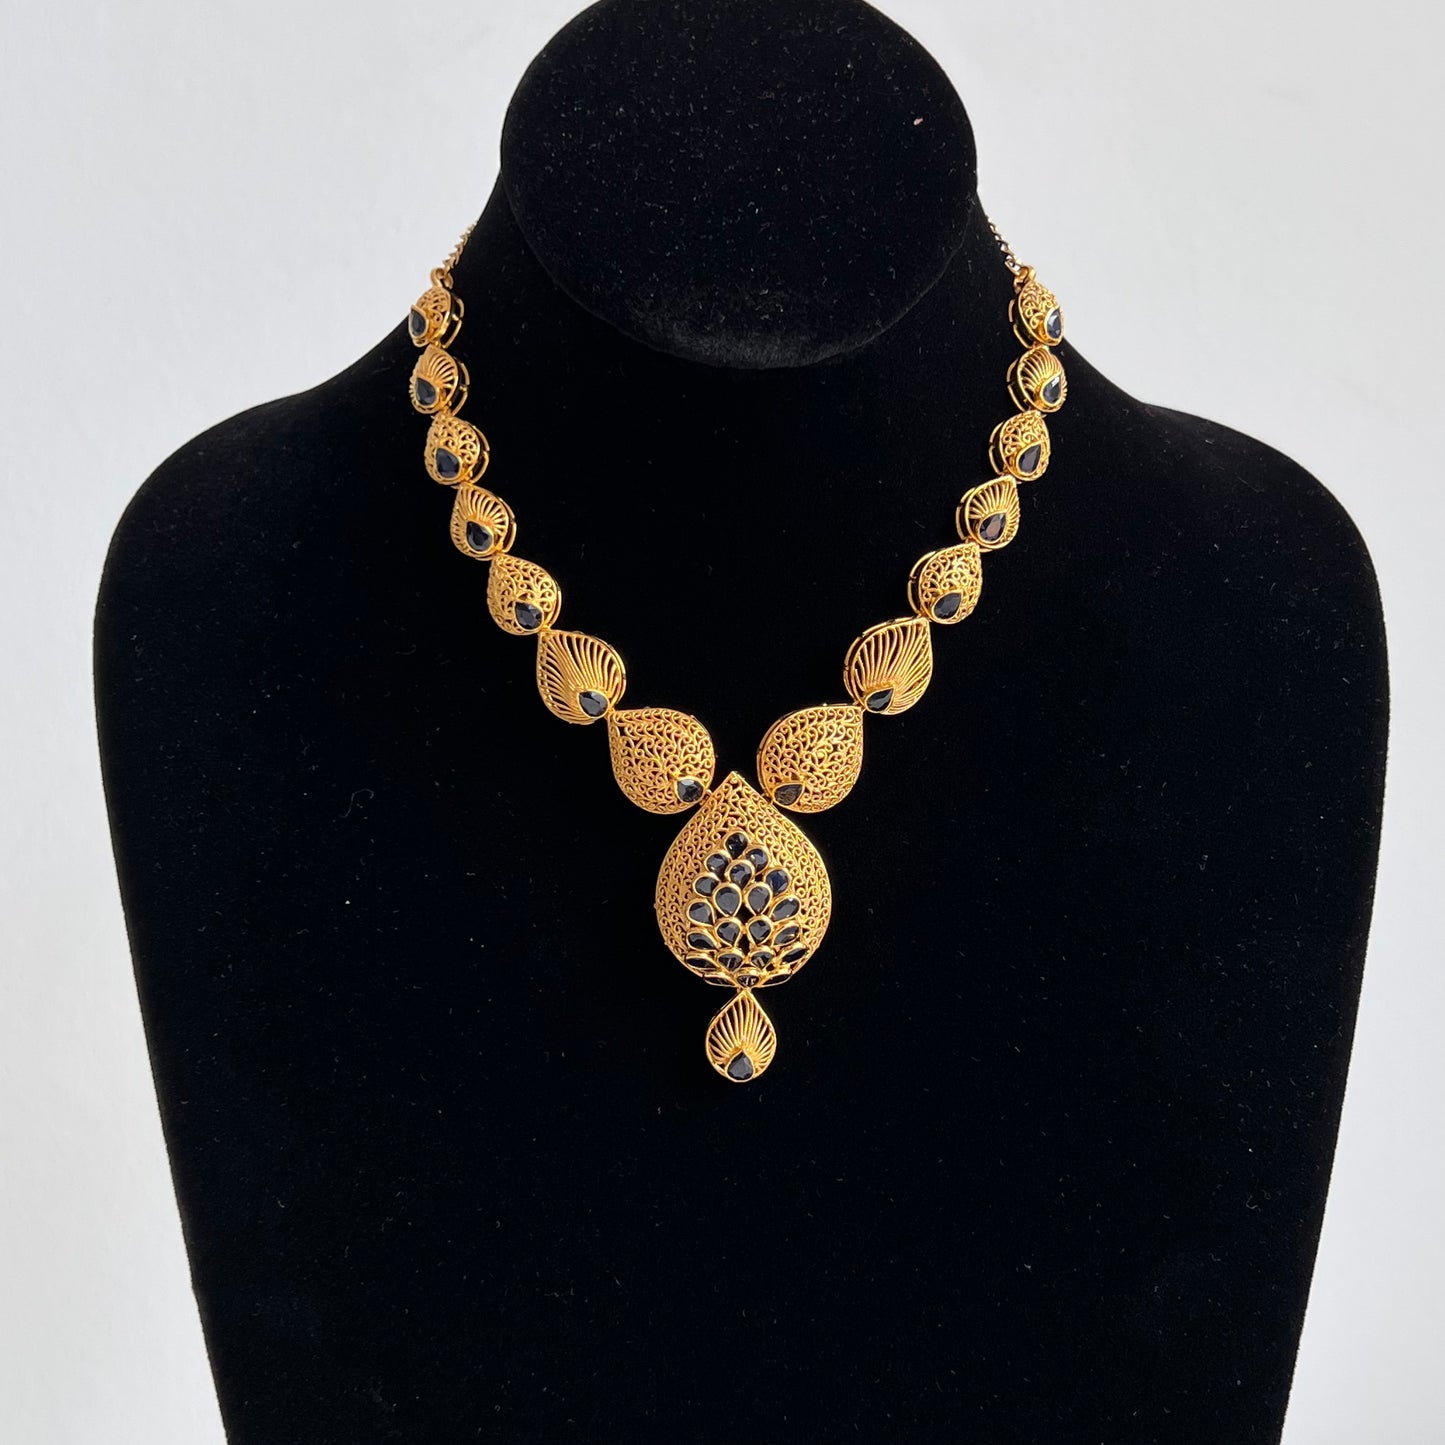 Edgy Gold Necklace with Shining Sapphires